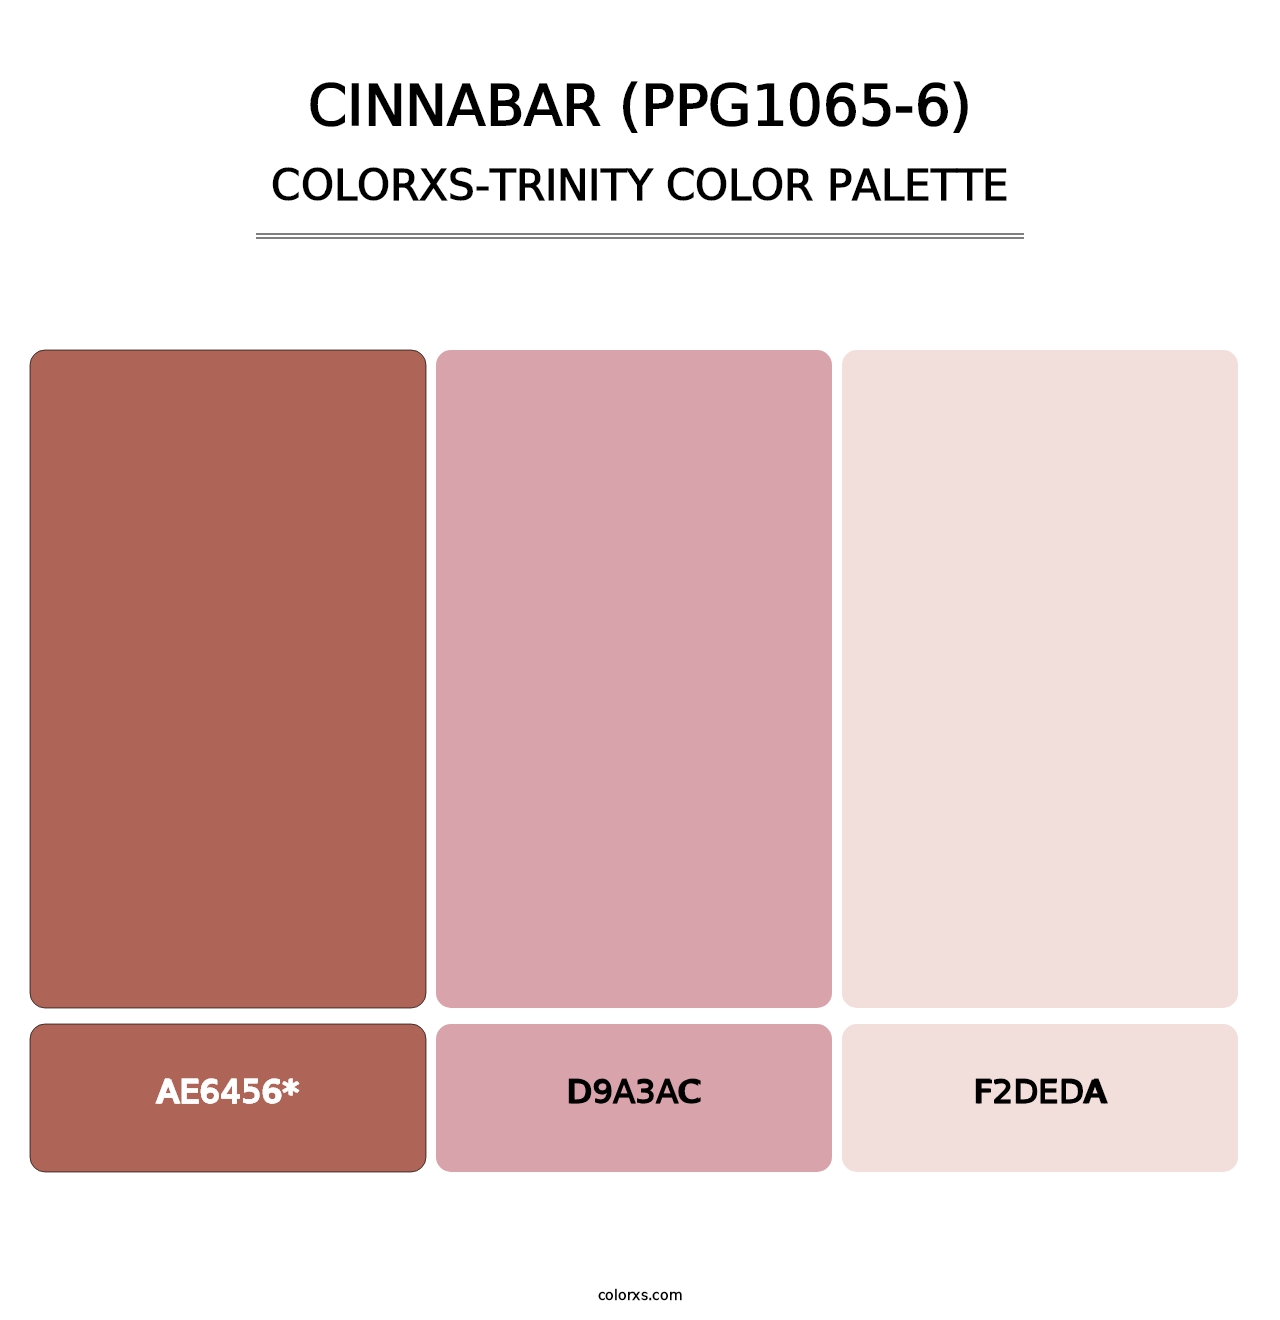 Cinnabar (PPG1065-6) - Colorxs Trinity Palette